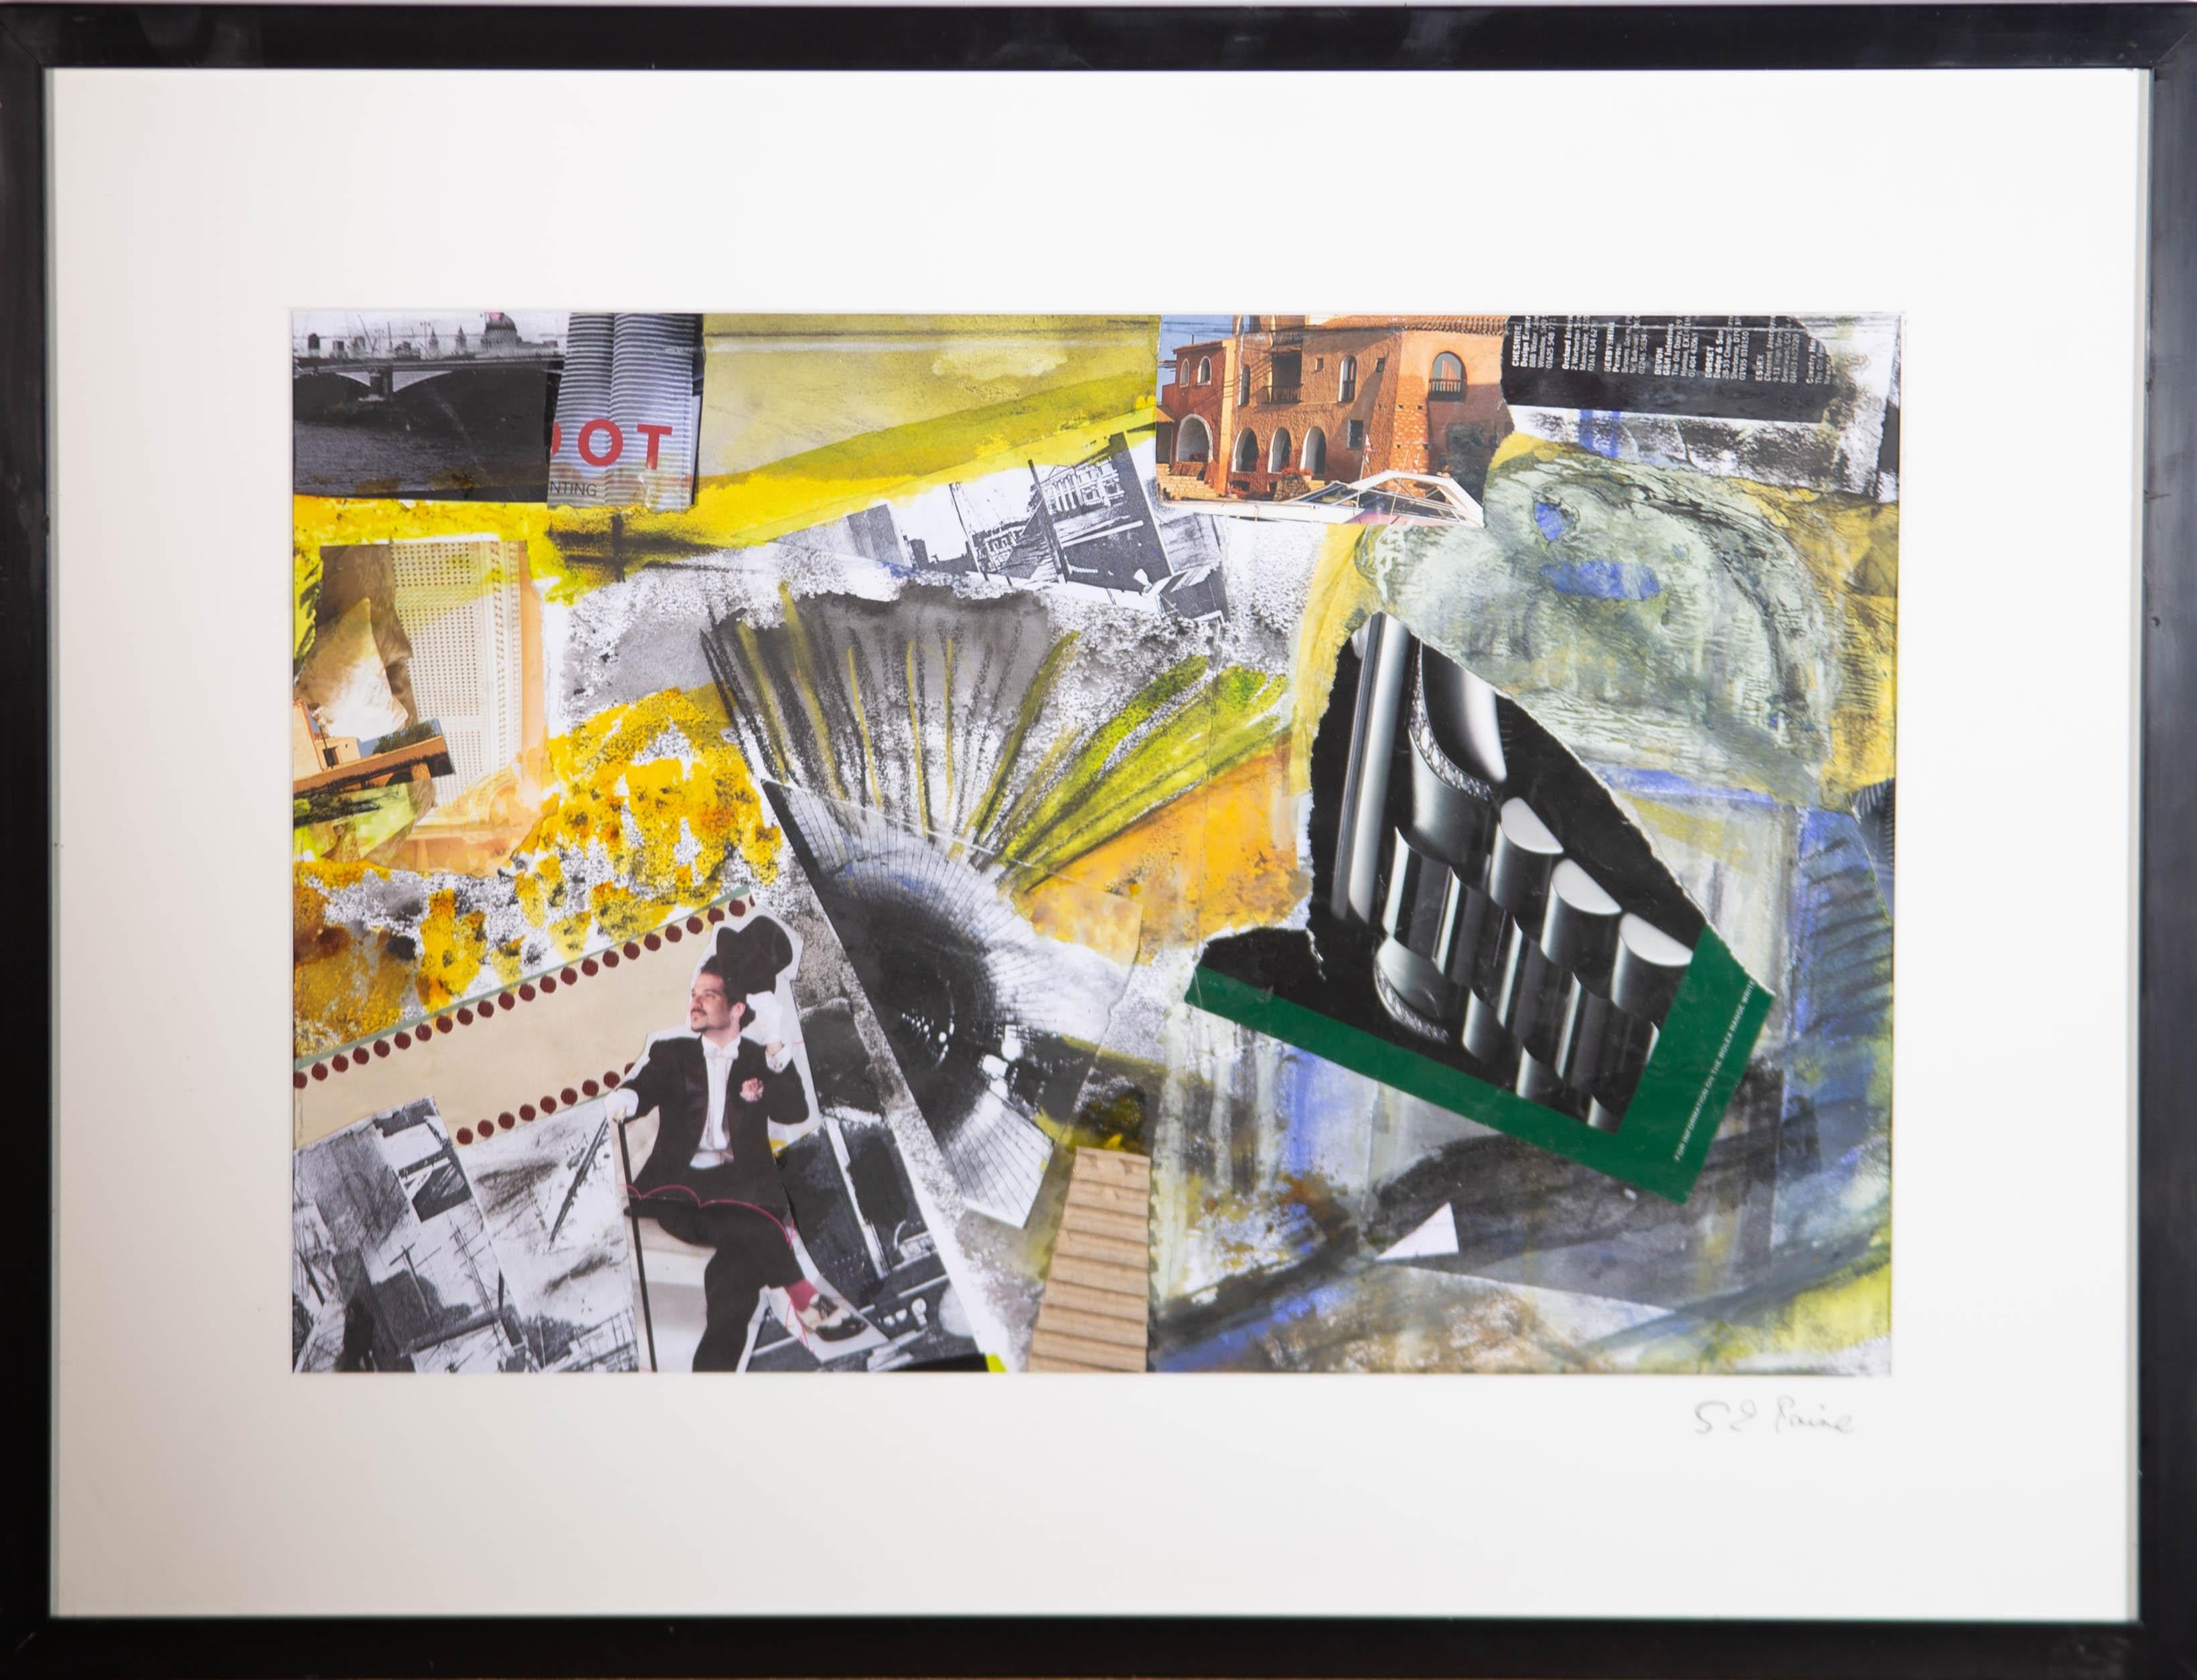 An engaging collage composition by the British artist Susan Paine. The materials used include magazine cutouts and watercolour. Signed to the lower right-hand corner of the mount. Well-presented in an off-white card mount and in a simple black